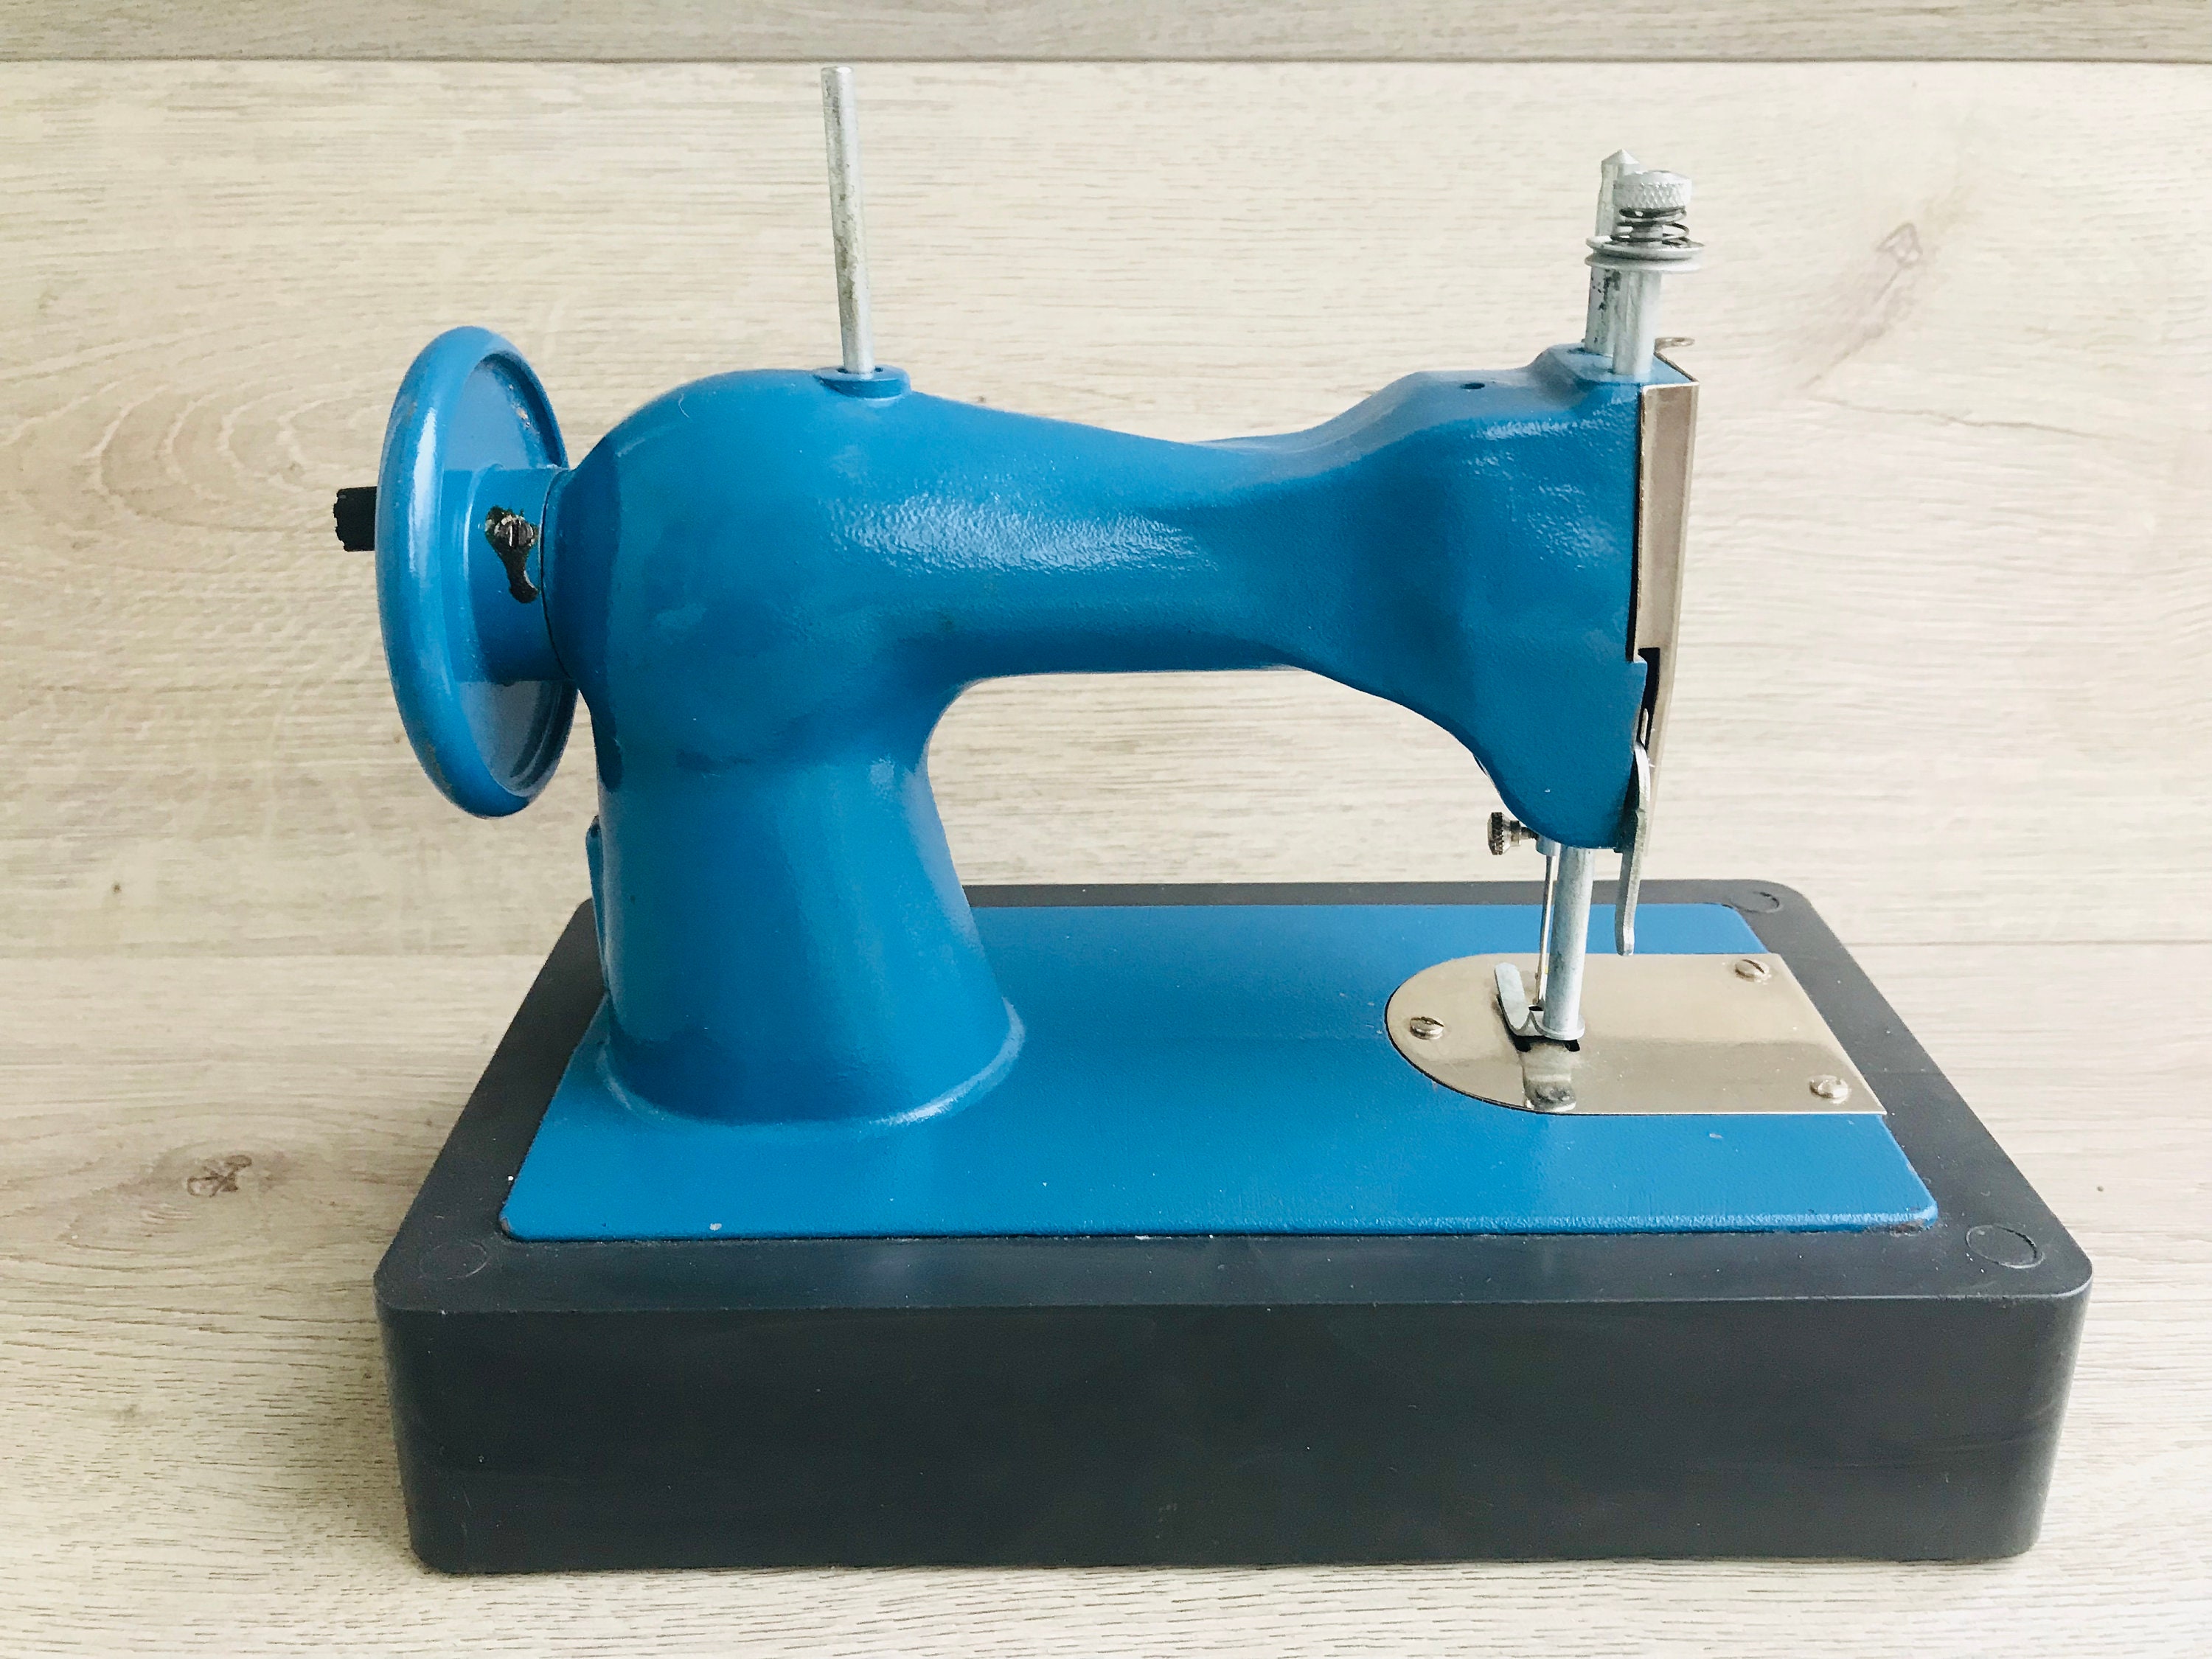 Penny's Children's Electric Sewing Machine P-1001 Vintage with case